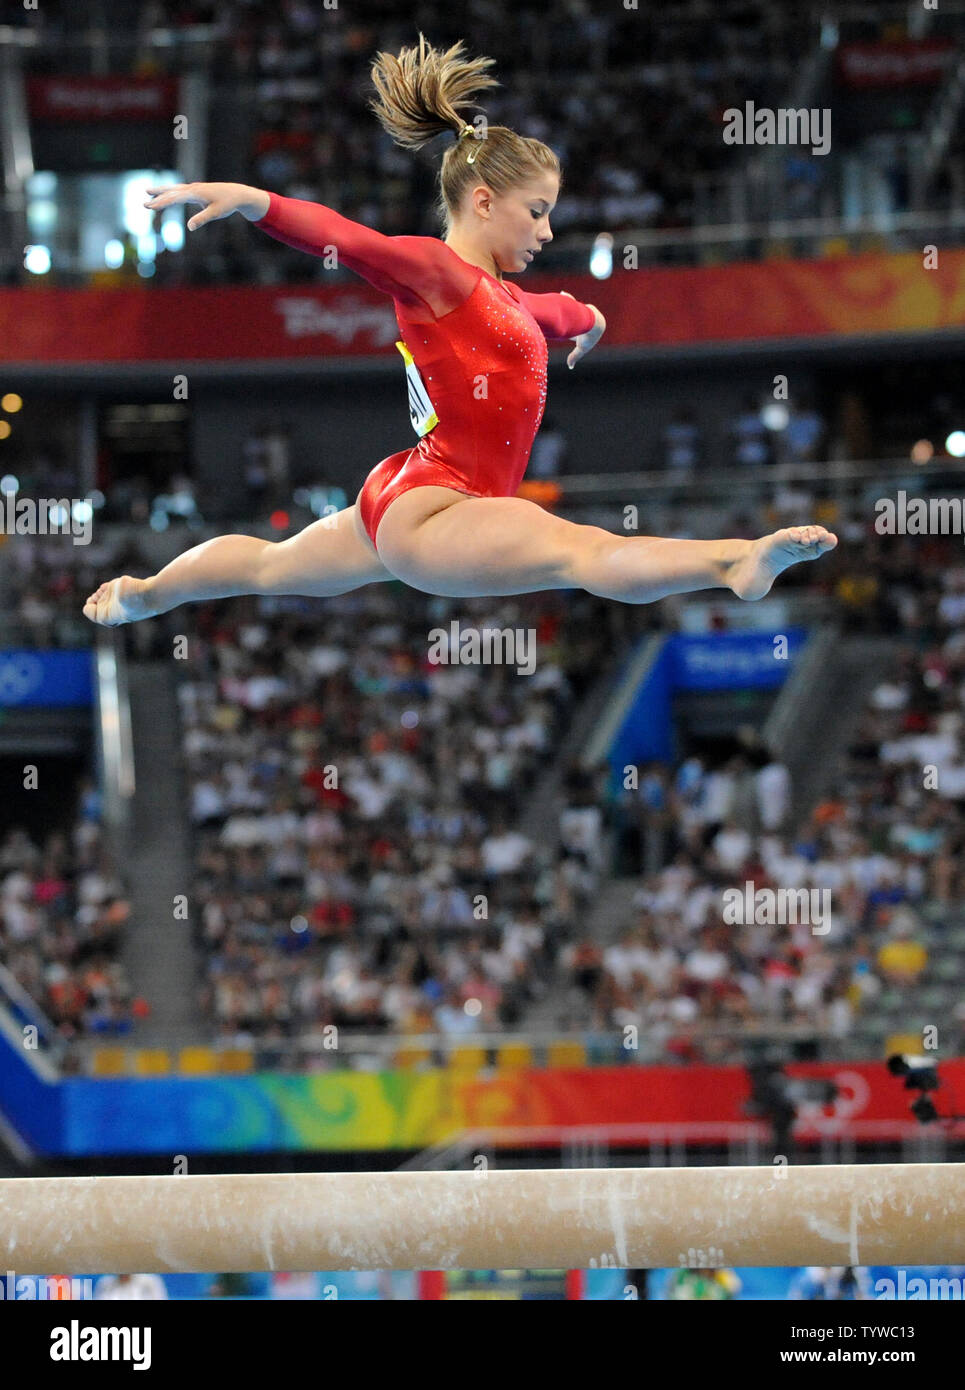 USA's Shawn Johnson performs on the Balance Beam of the Women's Individual All-Around Gymnastics Final at the National Indoor Stadium at the Summer Olympics in Beijing on August 15, 2008.  Johnson won the silver medal and teammate Nastia Liukin won the gold.  (UPI Photo/Pat Benic) Stock Photo